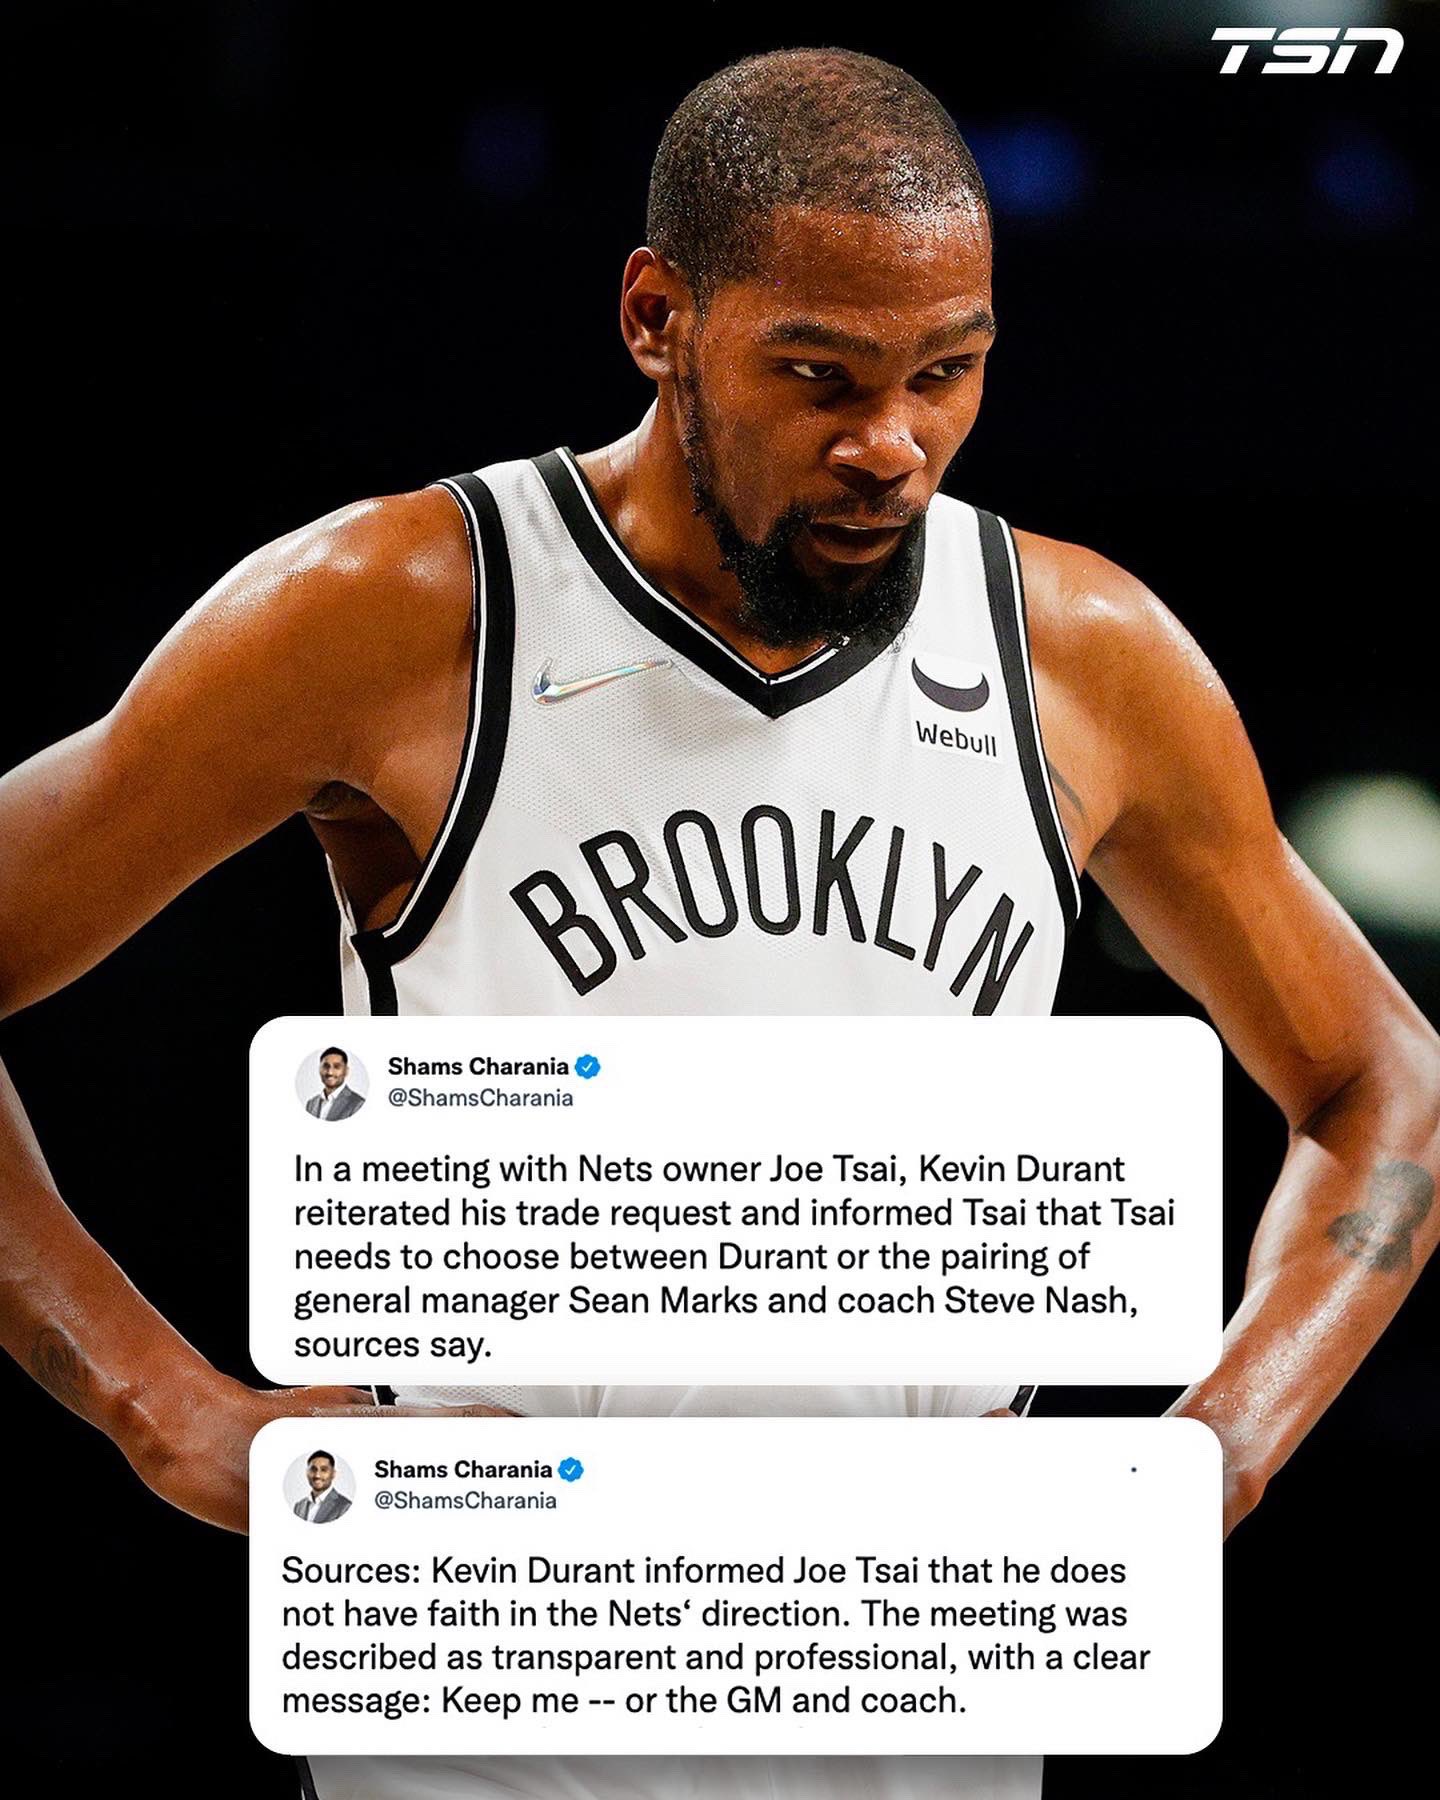 Kevin Durant Reiterates Trade Request to Nets in Meeting